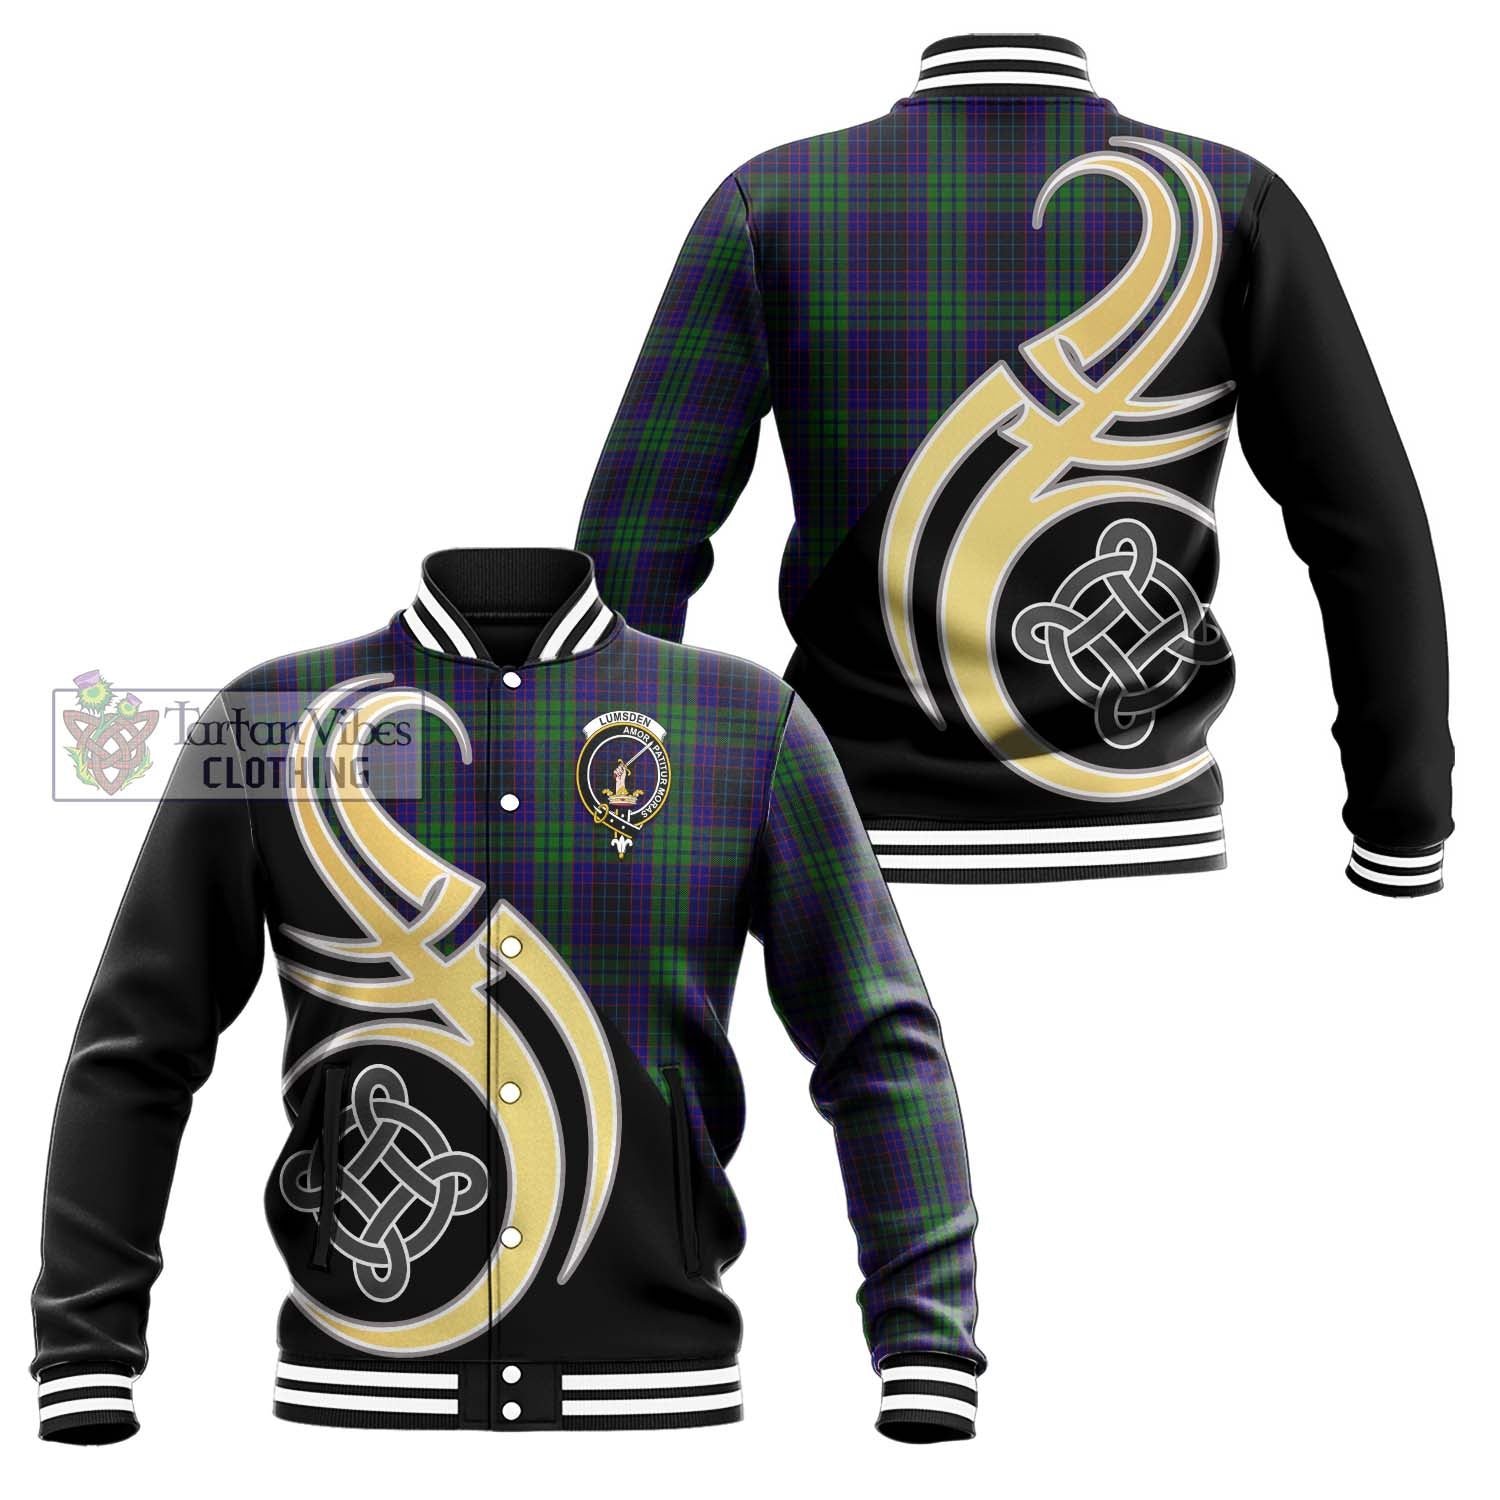 Tartan Vibes Clothing Lumsden Green Tartan Baseball Jacket with Family Crest and Celtic Symbol Style